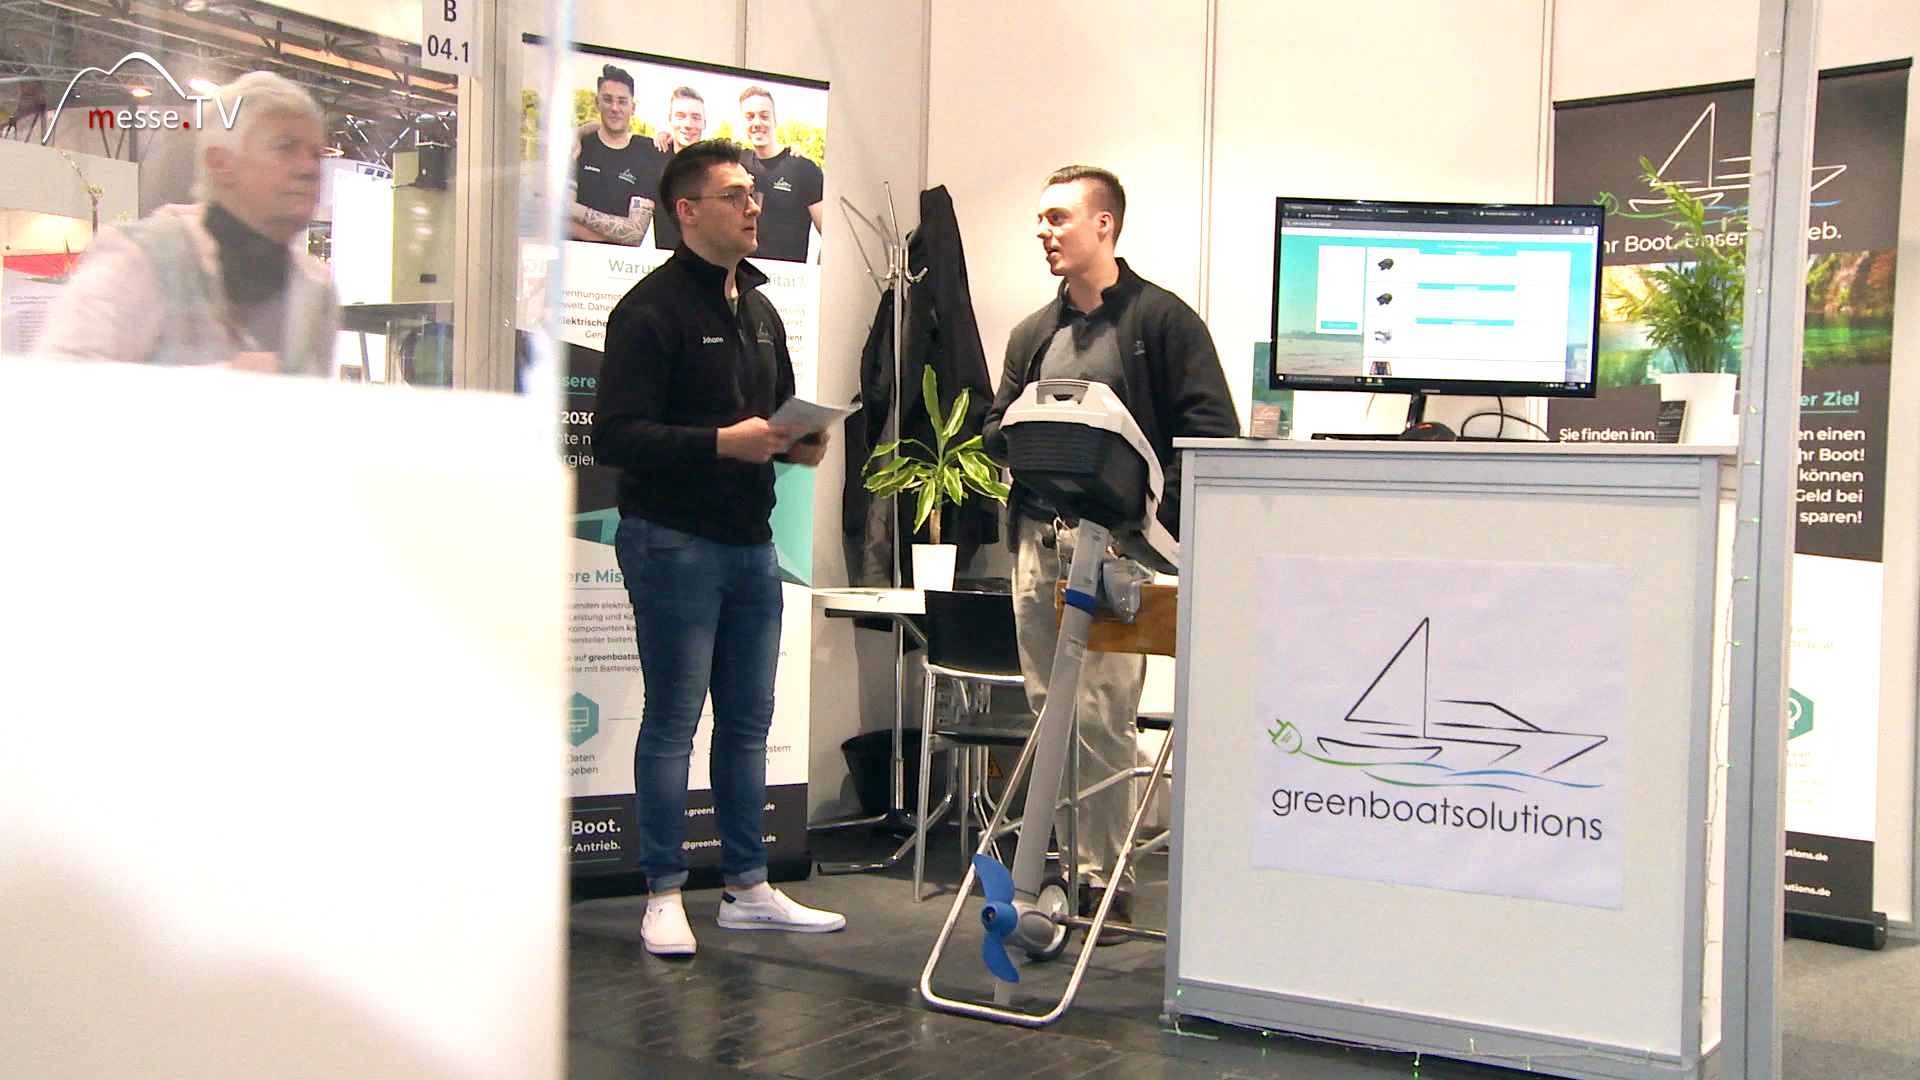 Greenboat Solutions Motorboat electric drive conversion boat 2020 Dusseldorf Trade Fair